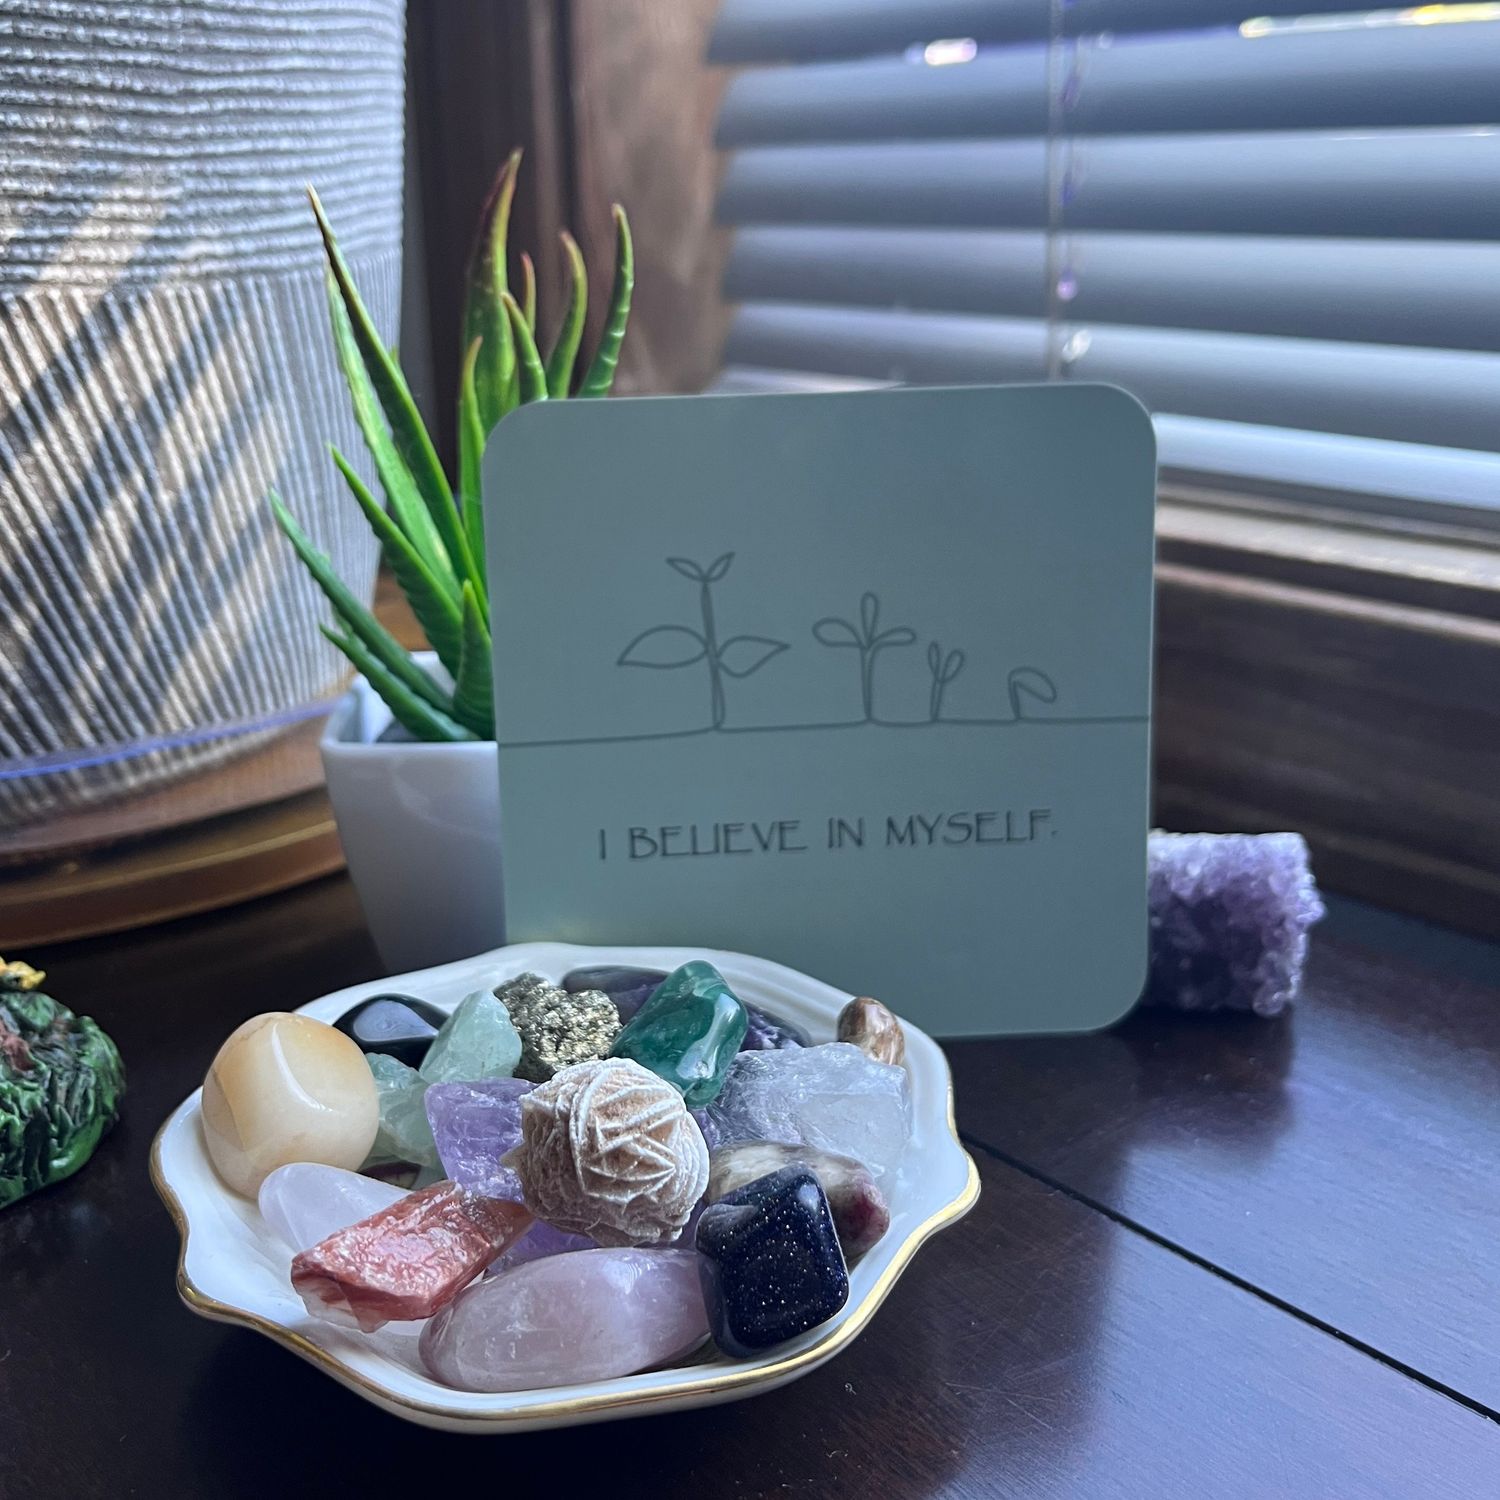 Calm Club good vibes relaxing crystal set